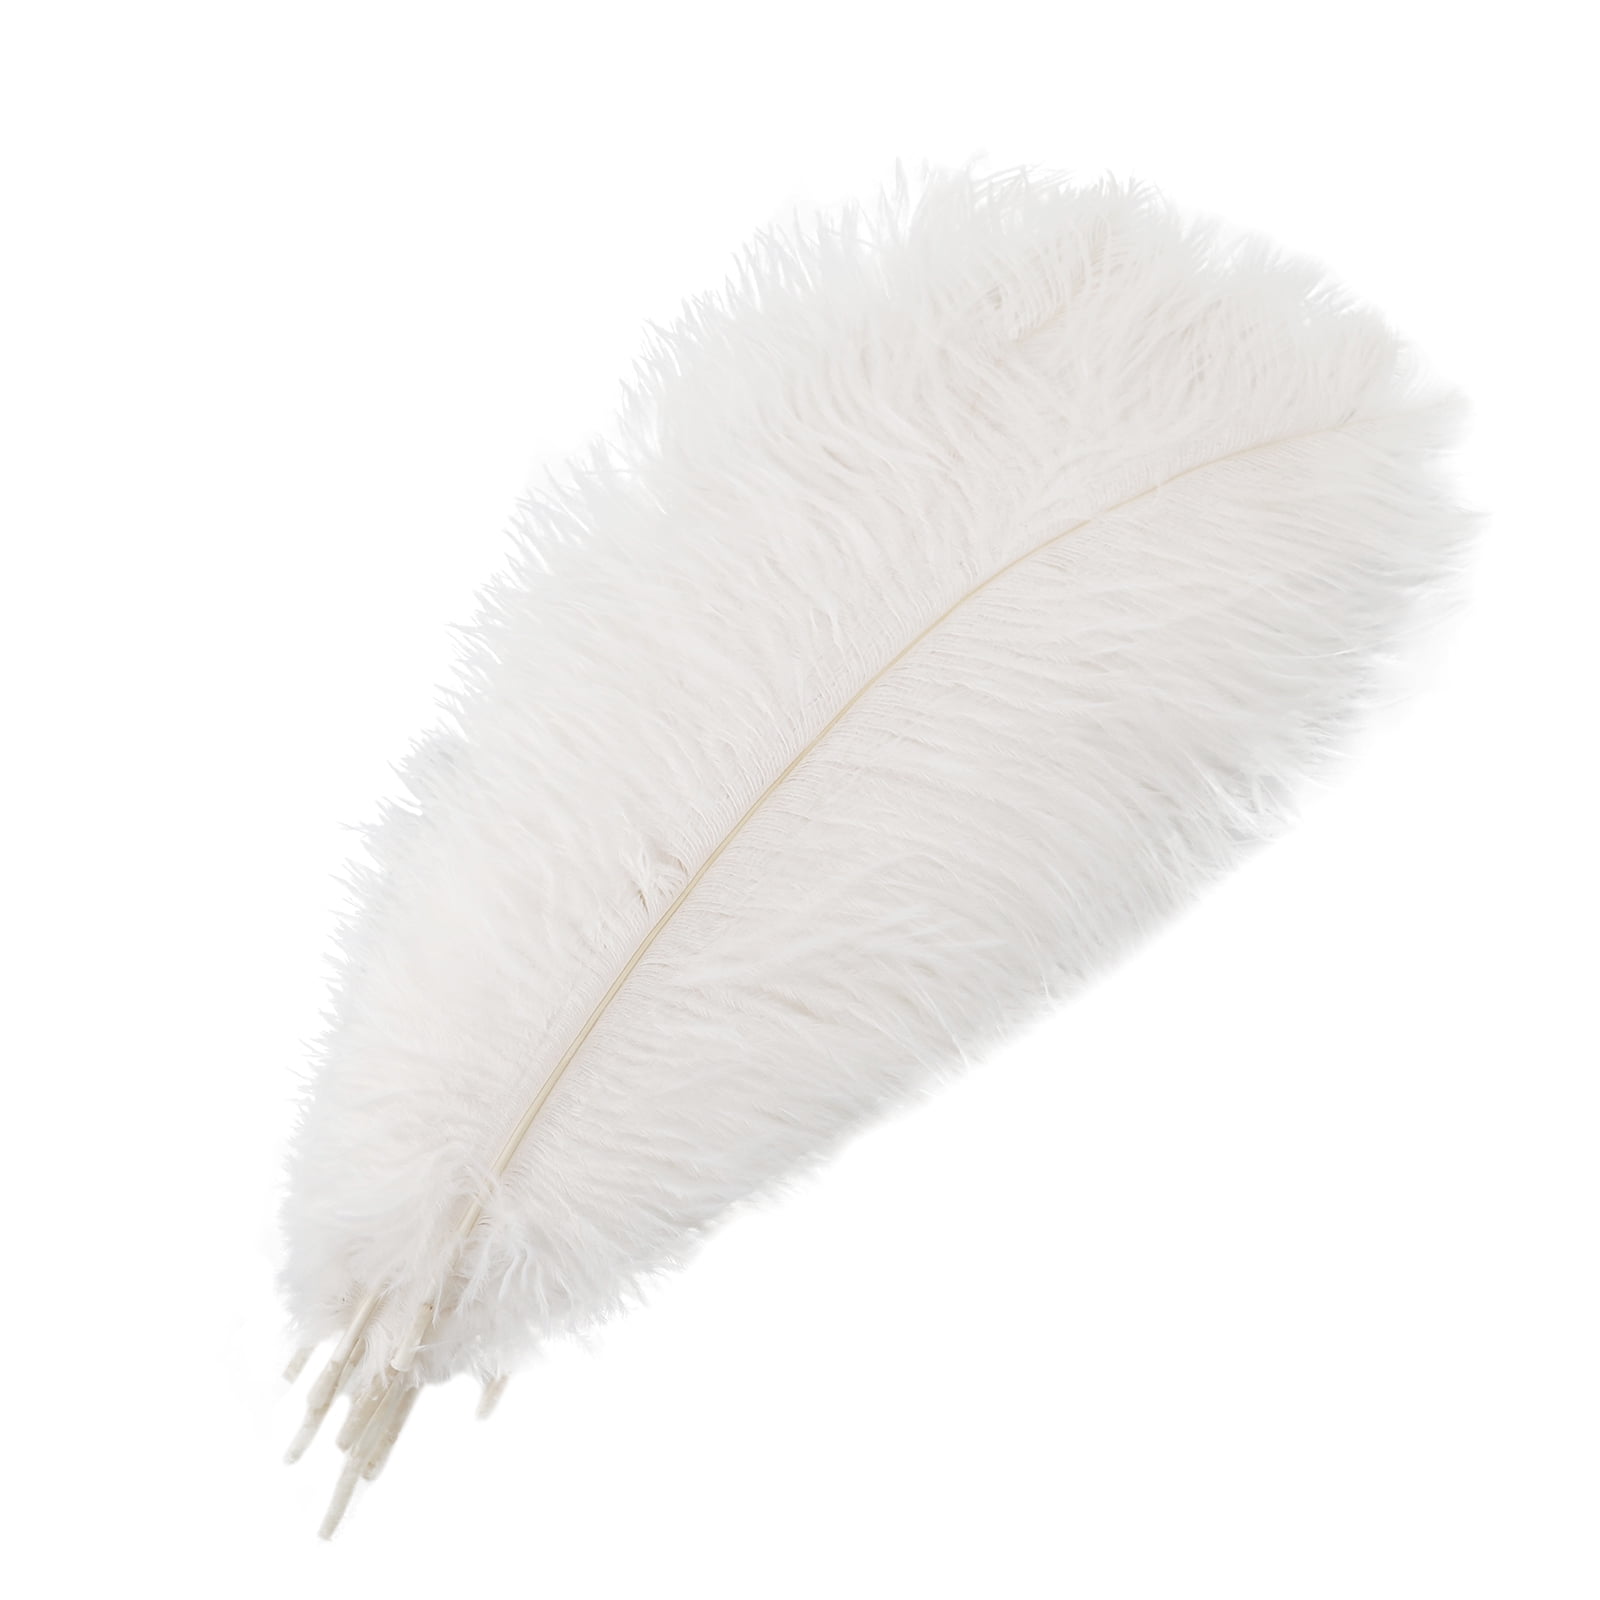 EUBUY 10Pcs Colorful Natural Ostrich Feathers Party Carnaval